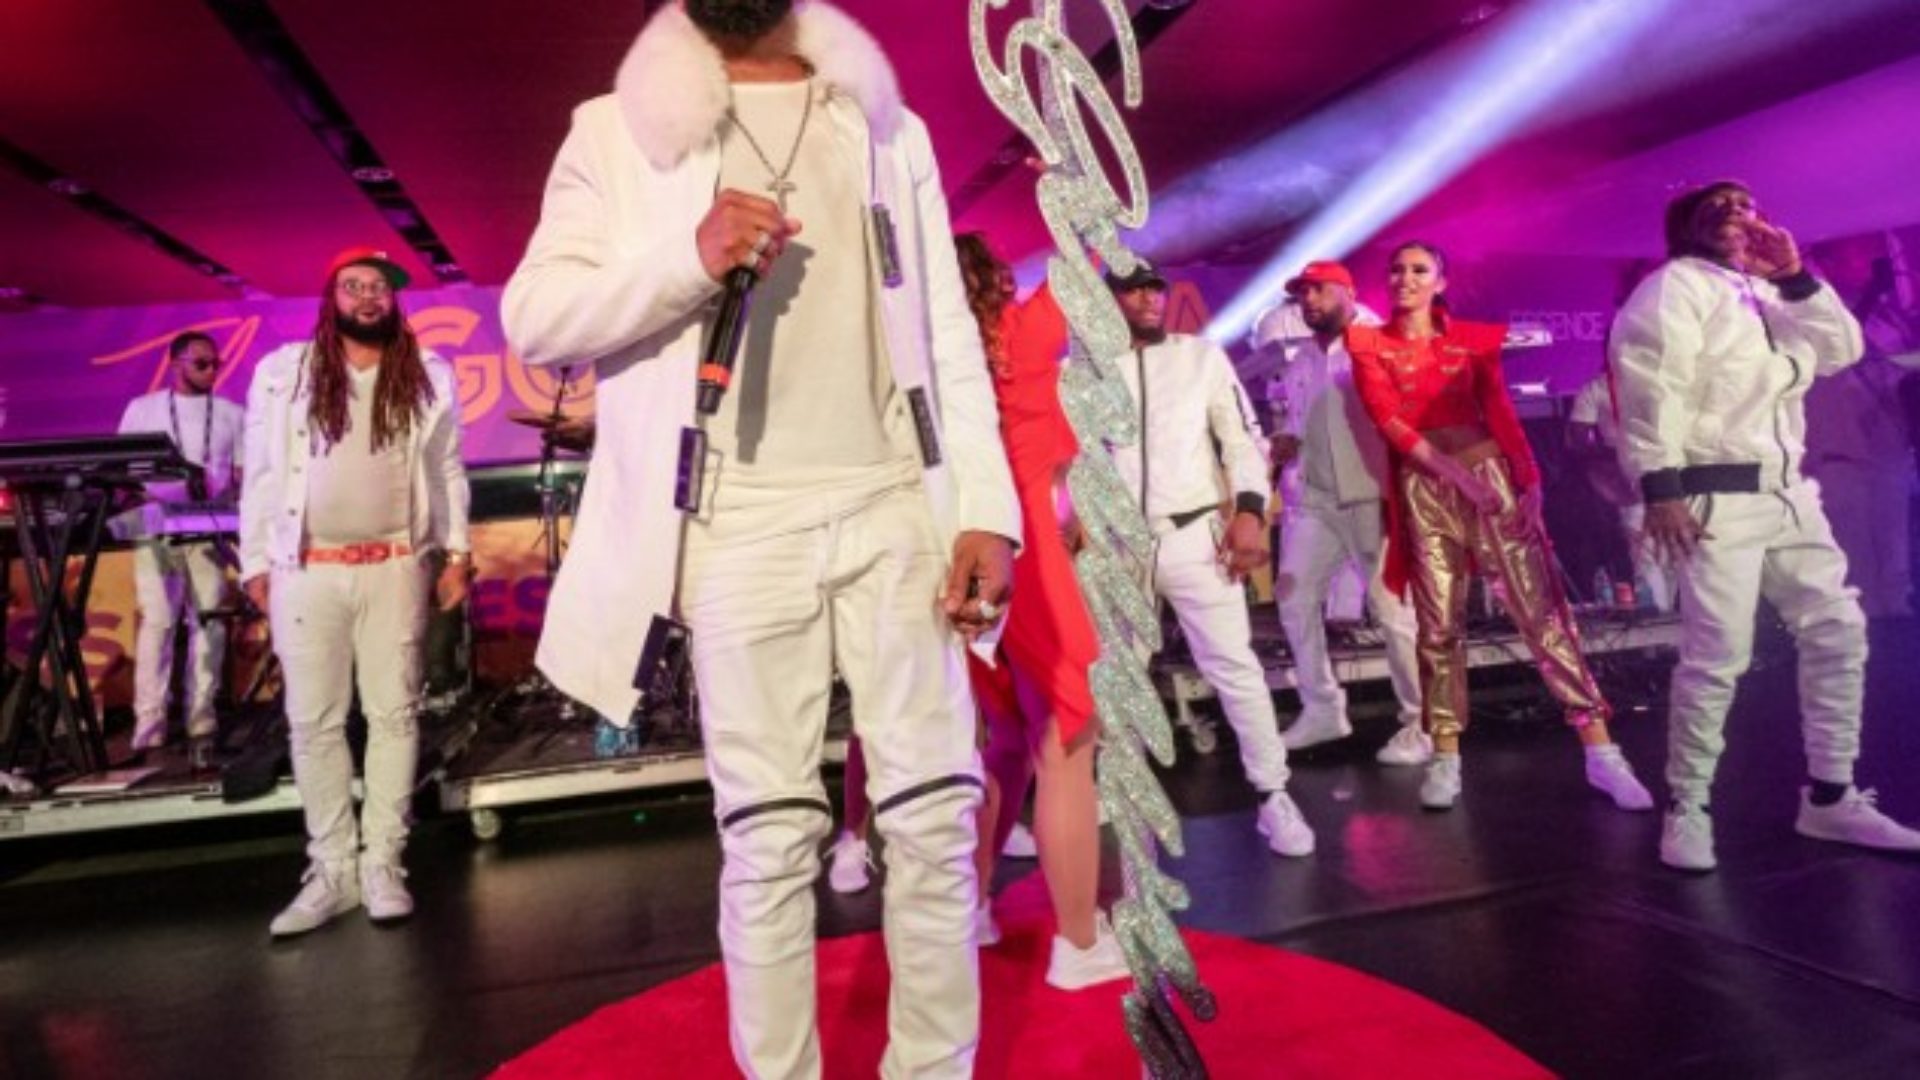 Ginuwine’s Essence Festival Appearance Reminded Us Why He’s Still A Hearththrob